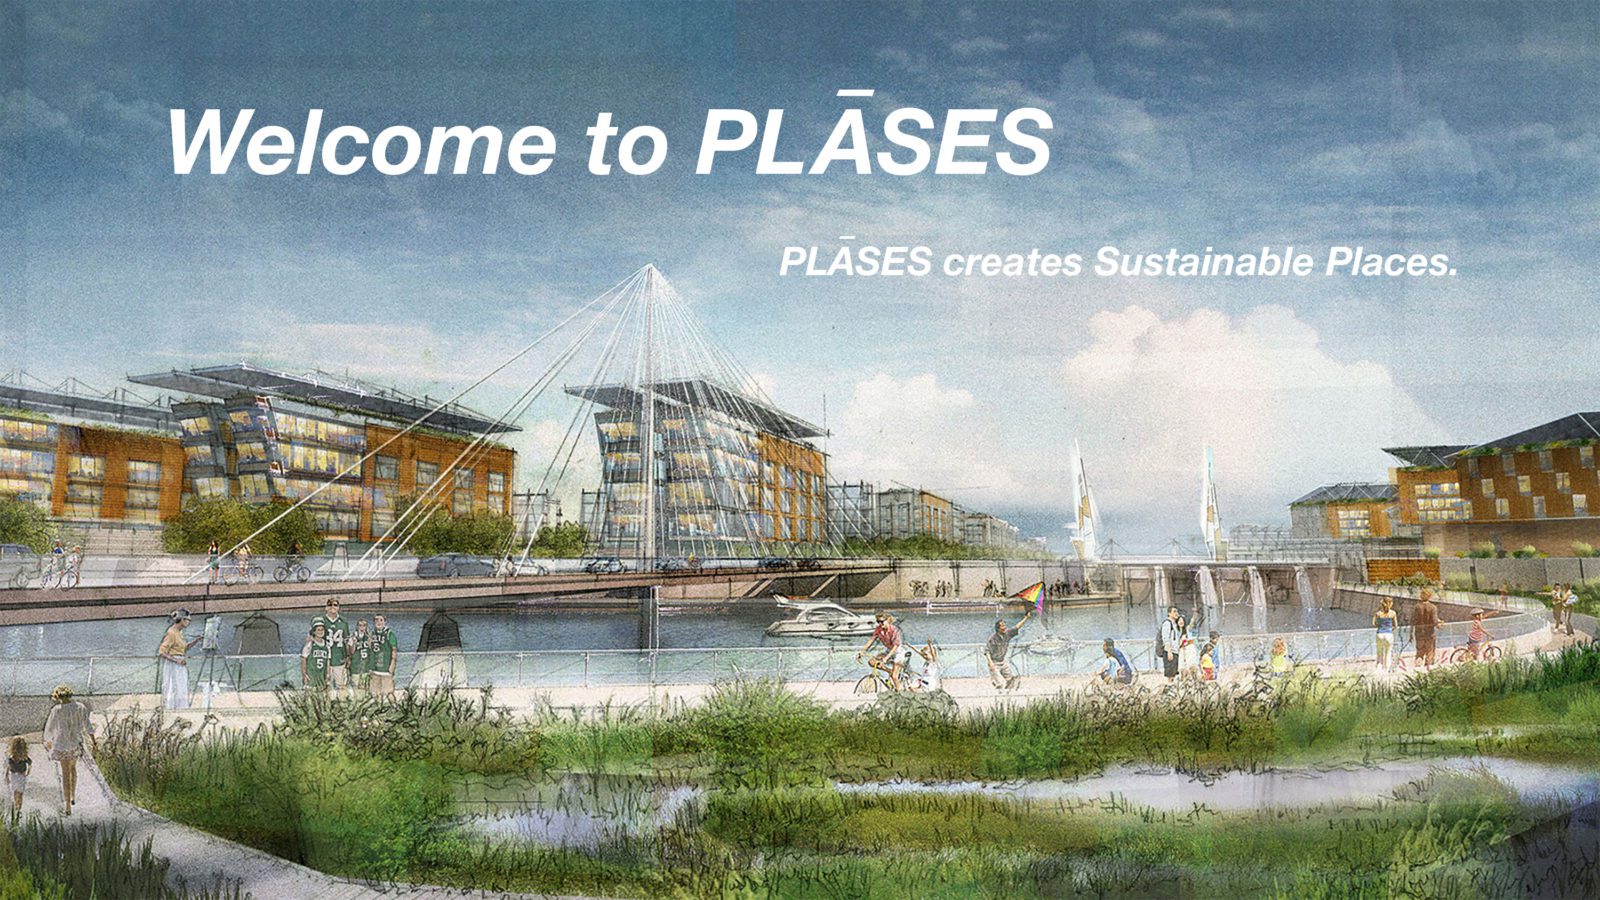 Watercolor sketch of an urban area surrounding water. "Welcome to PLASES; PLASES creates Sustainable Places" text overlaid.